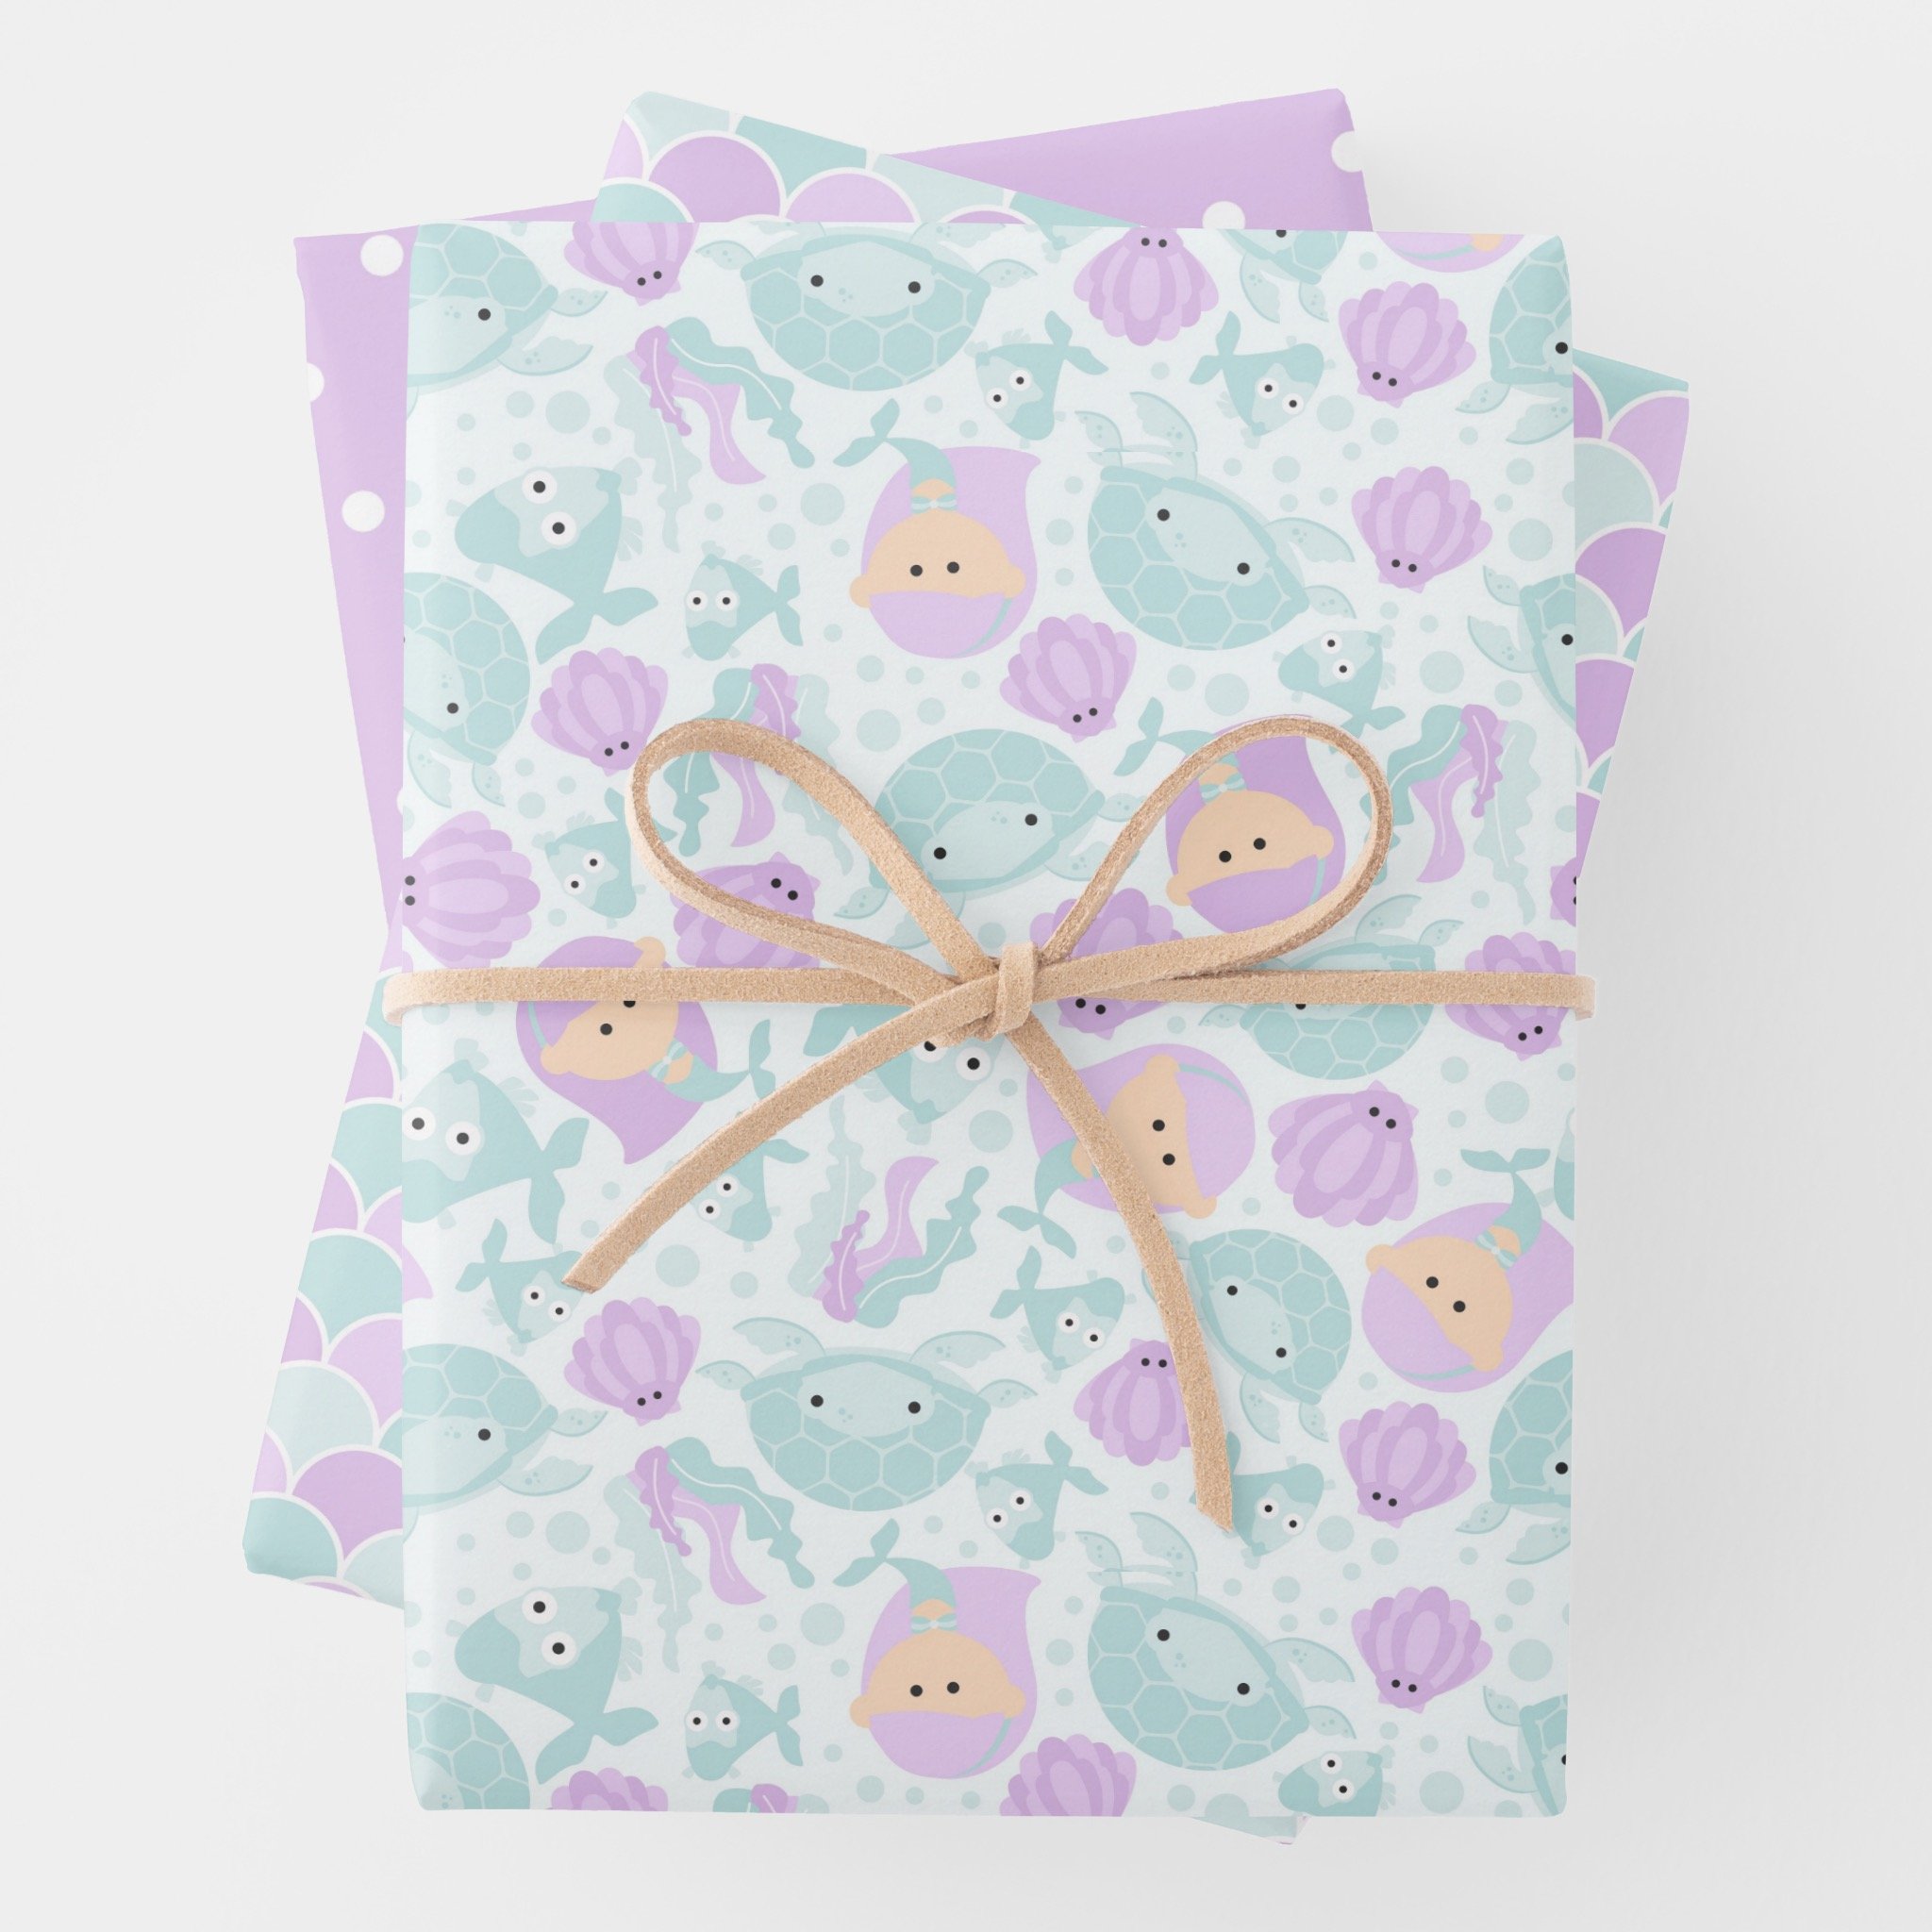 Zazzle - Mockup - Purple & Teal Mermaid Party Wrapping Paper Sheets.jpeg